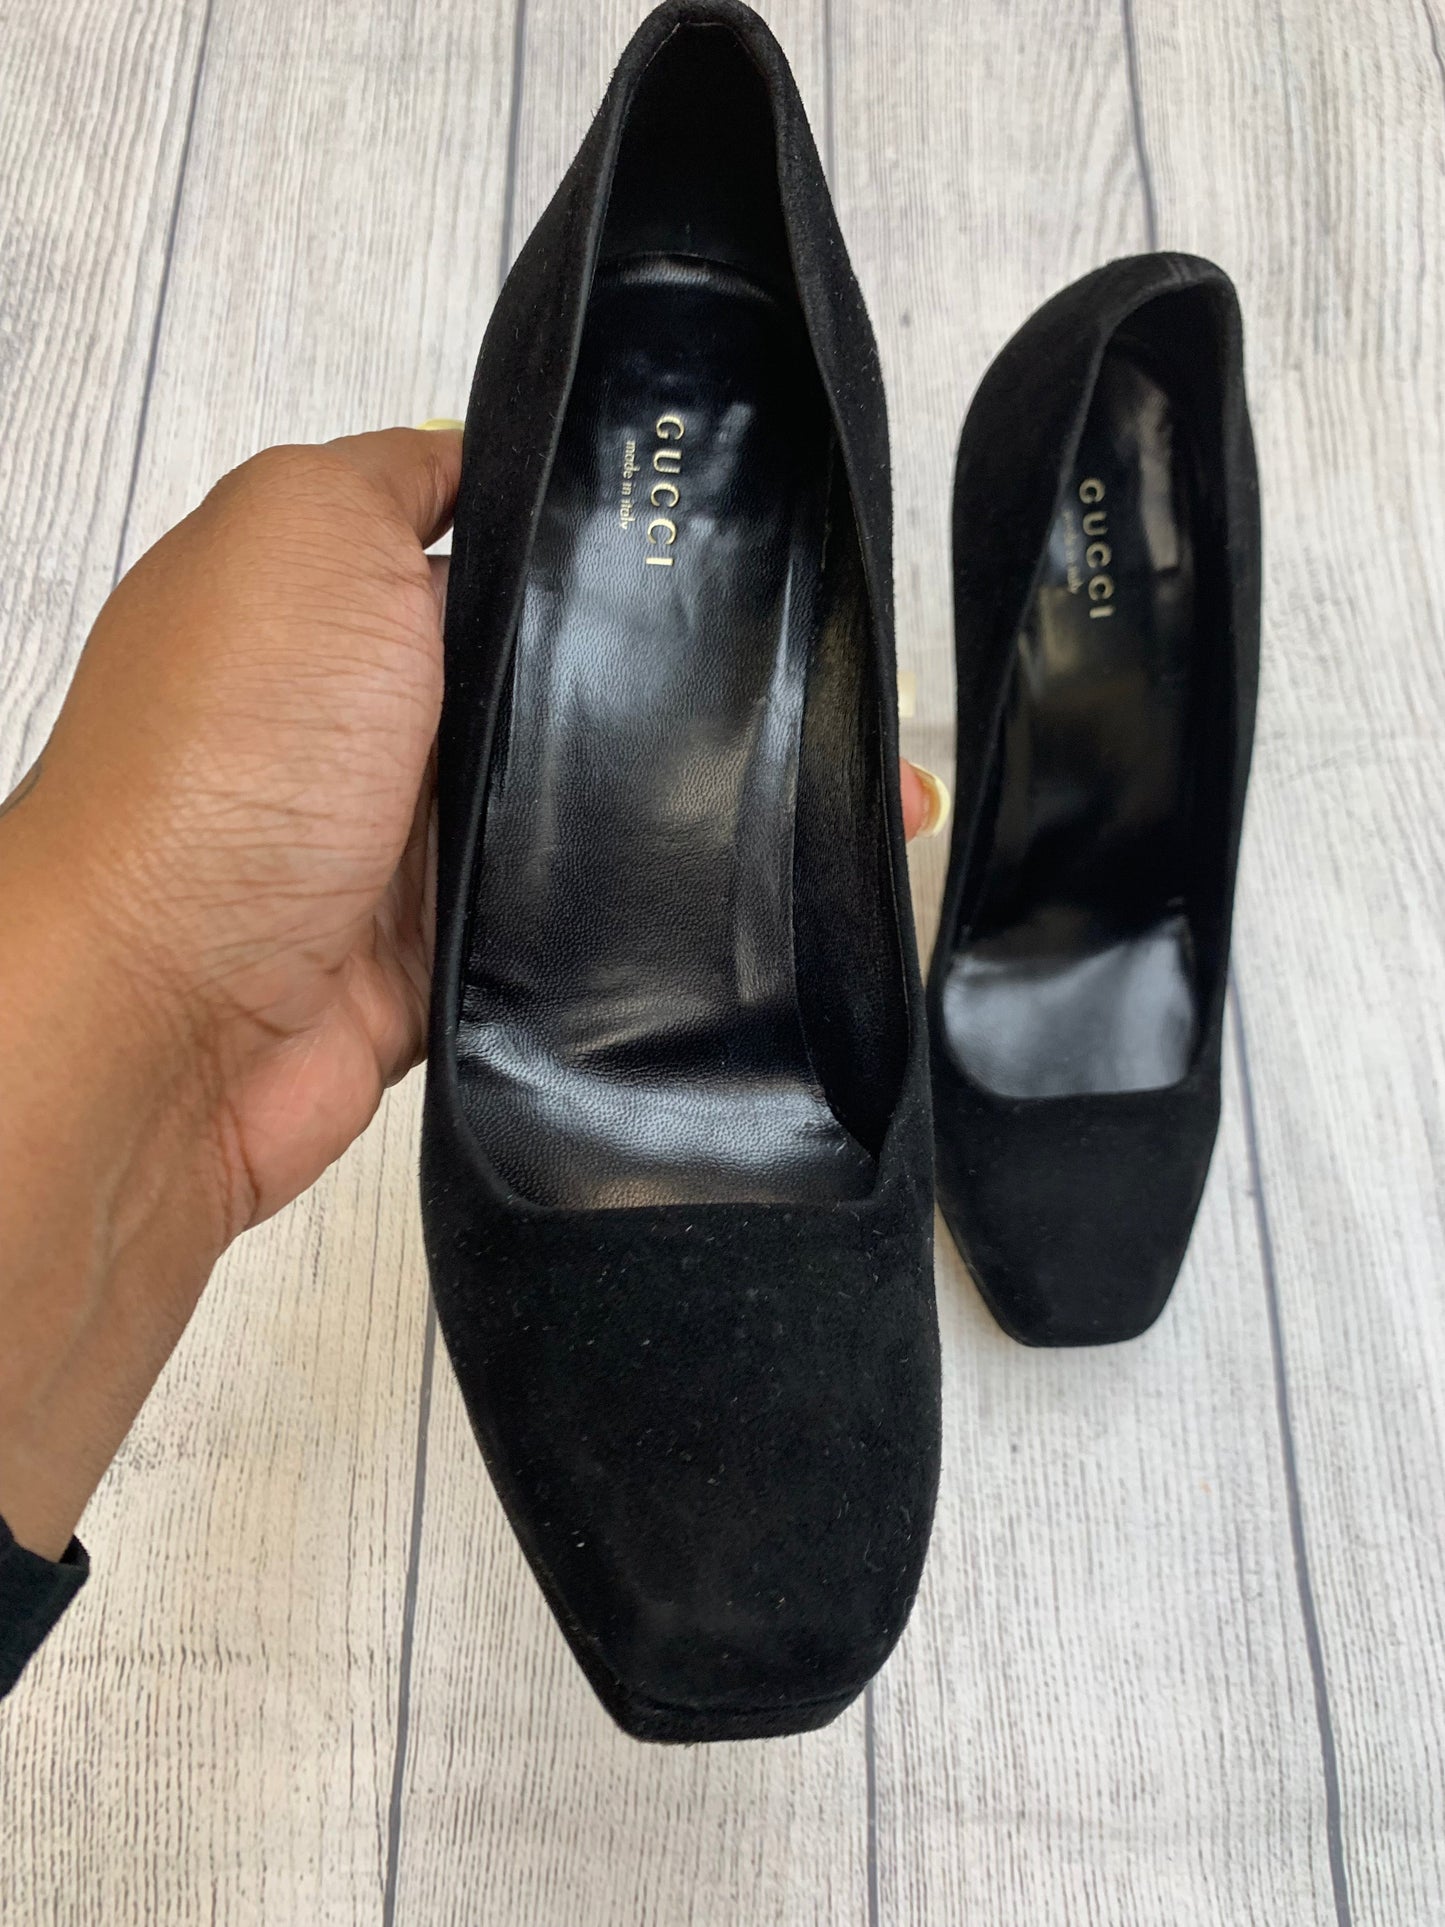 Shoes Designer By Gucci  Size: 8.5